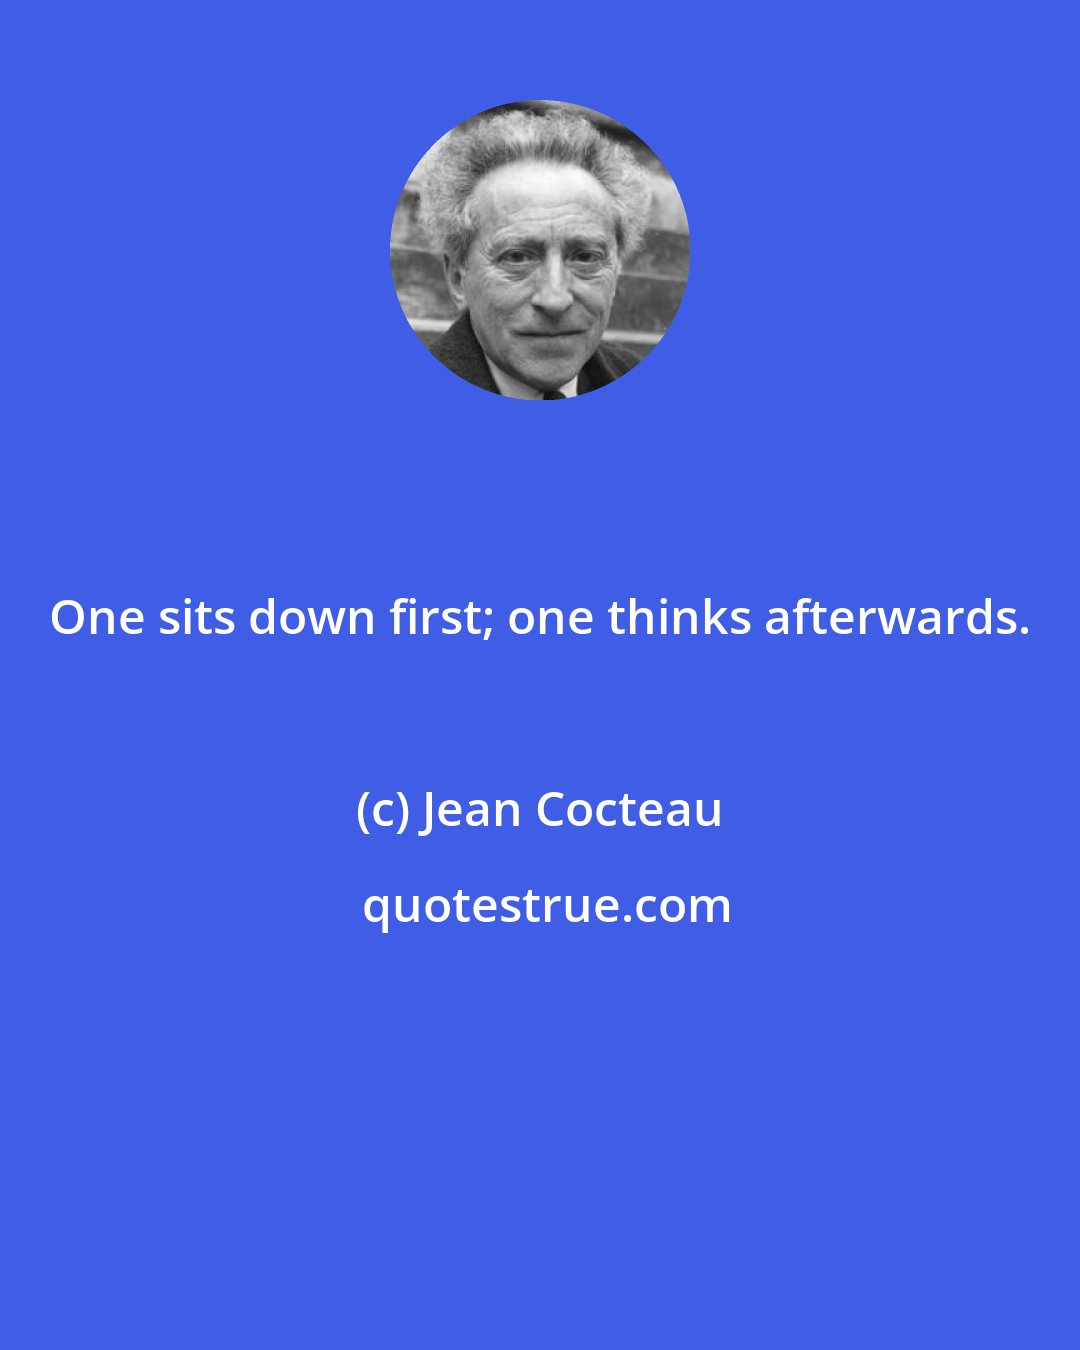 Jean Cocteau: One sits down first; one thinks afterwards.